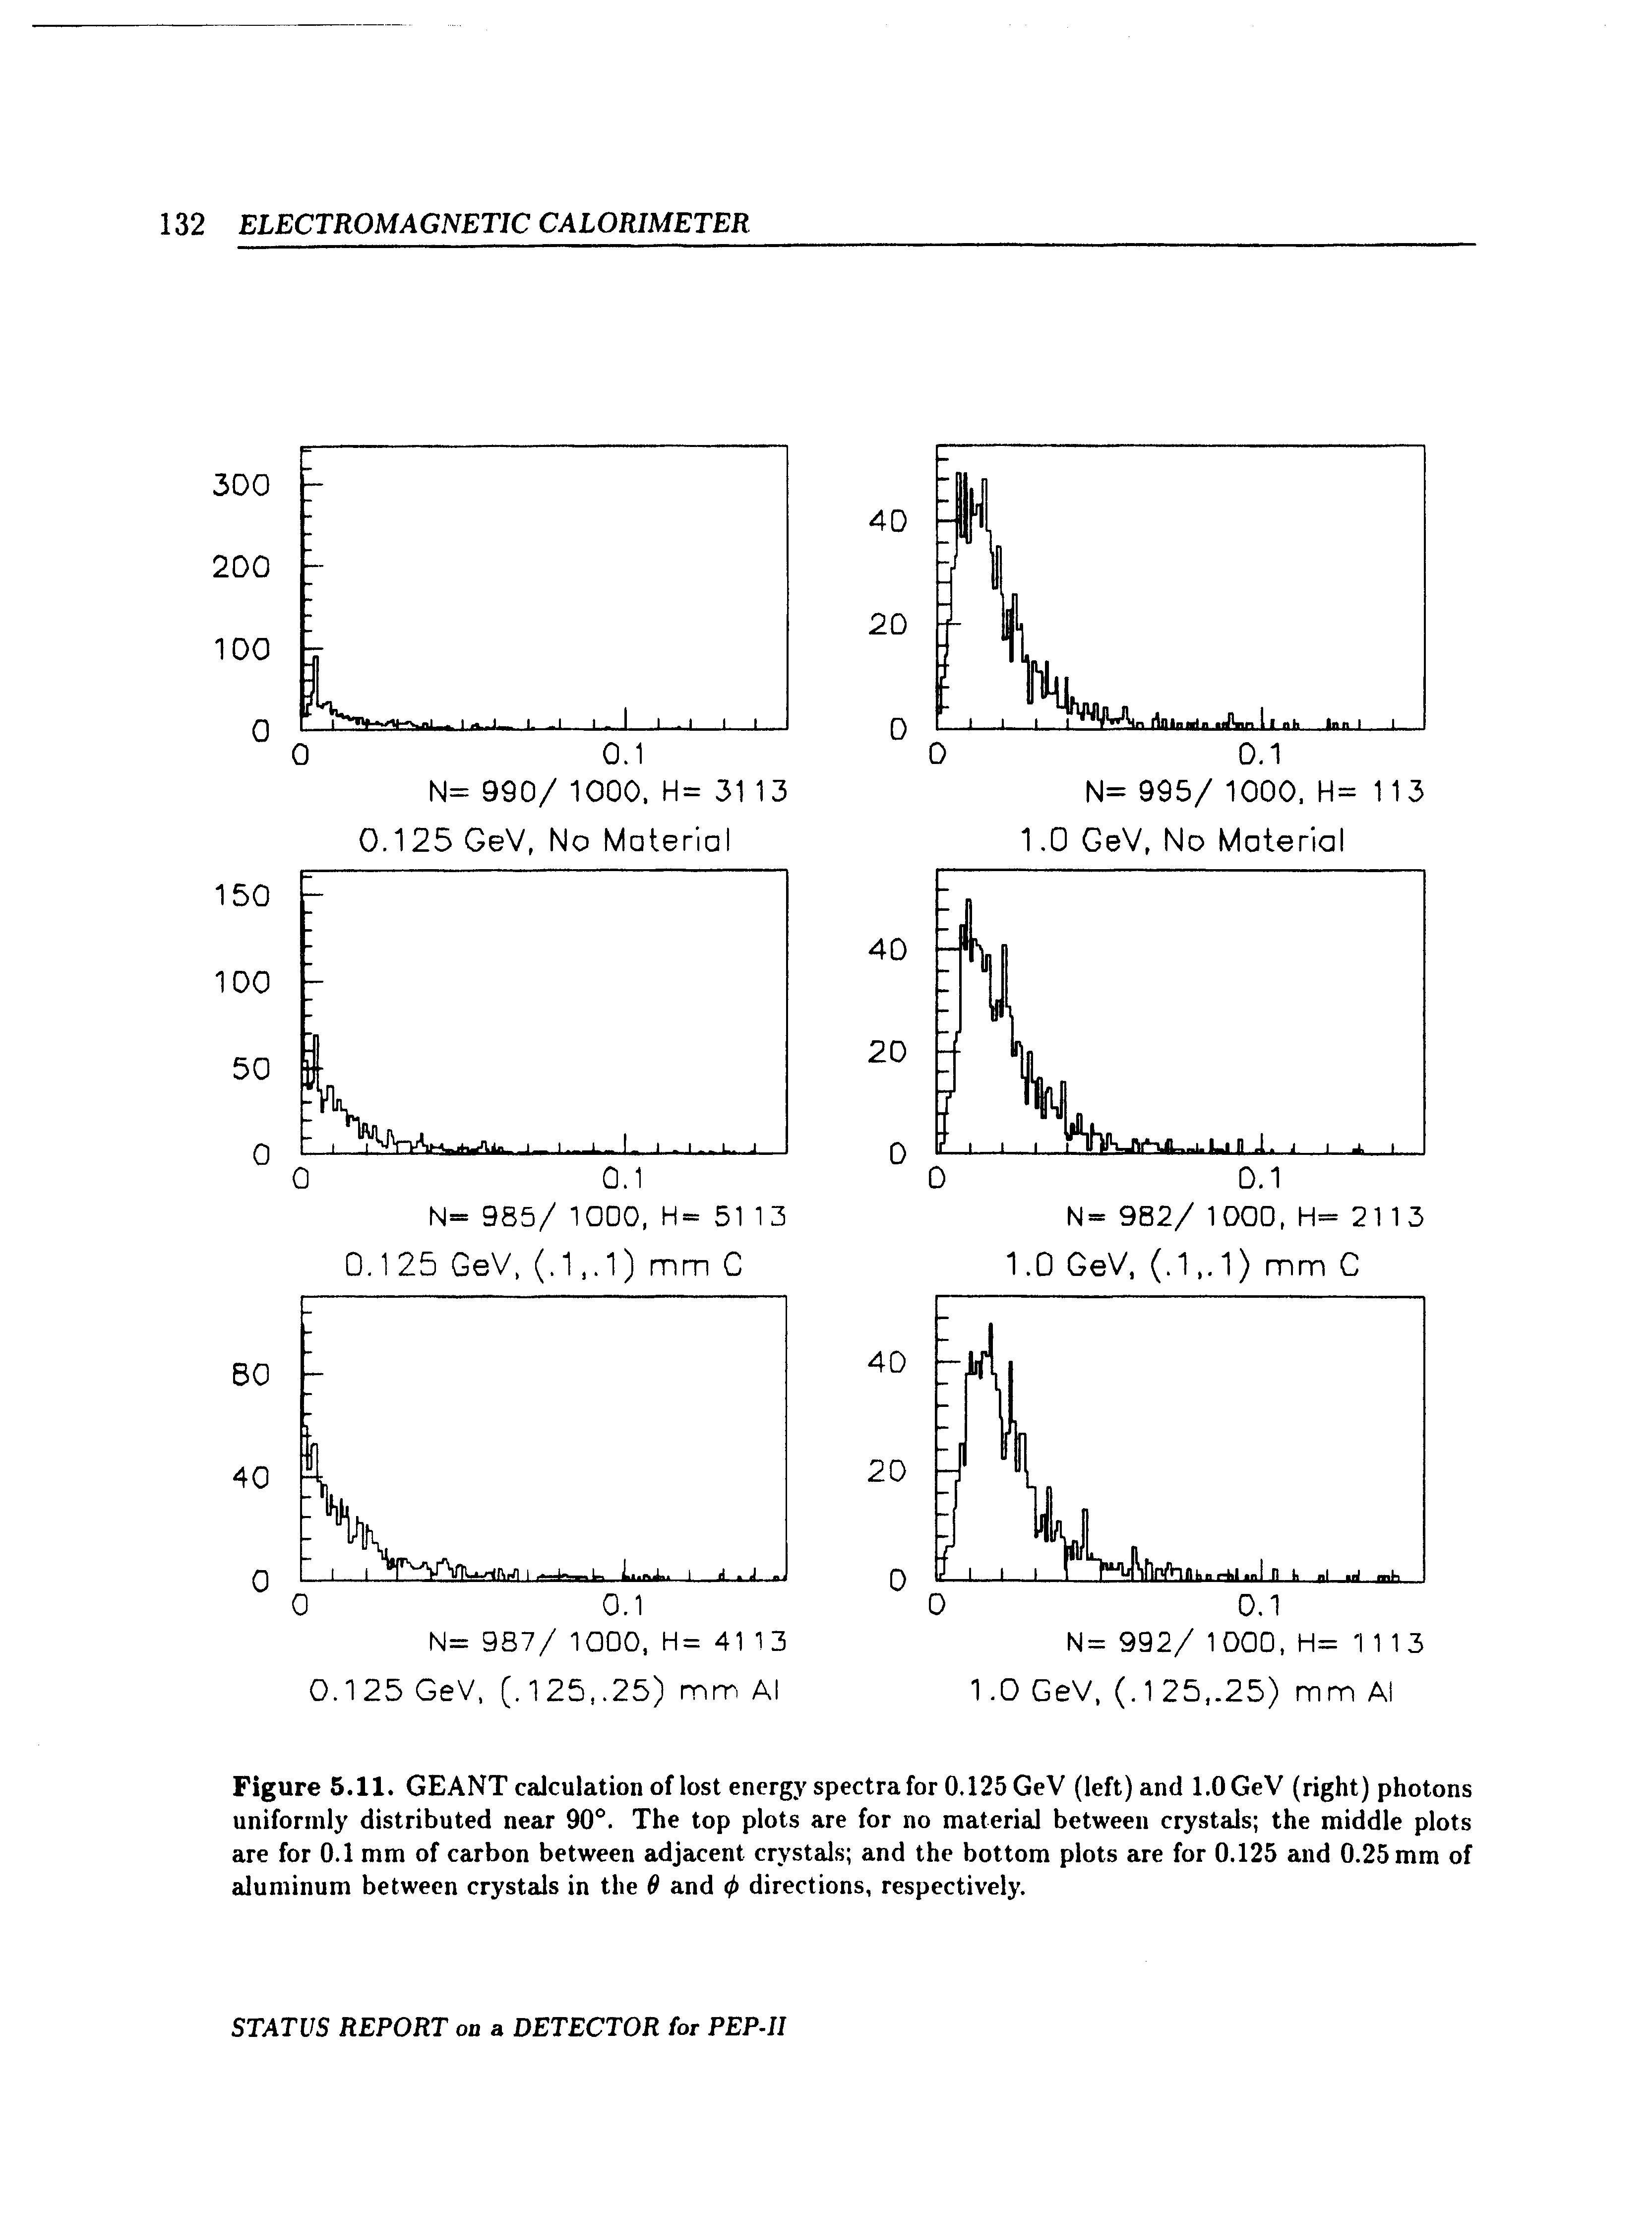 Figure 5.11. GEANT calculation of lost energy spectra for 0.125 GeV (left) and 1.0 GeV (right) photons uniformly distributed near 90 . The top plots are for no material between crystals the middle plots are for 0.1 mm of carbon between adjacent crj stals and the bottom plots are for 0.125 and 0.25 mm of aluminum between crystals in the 6 and directions, respectively.